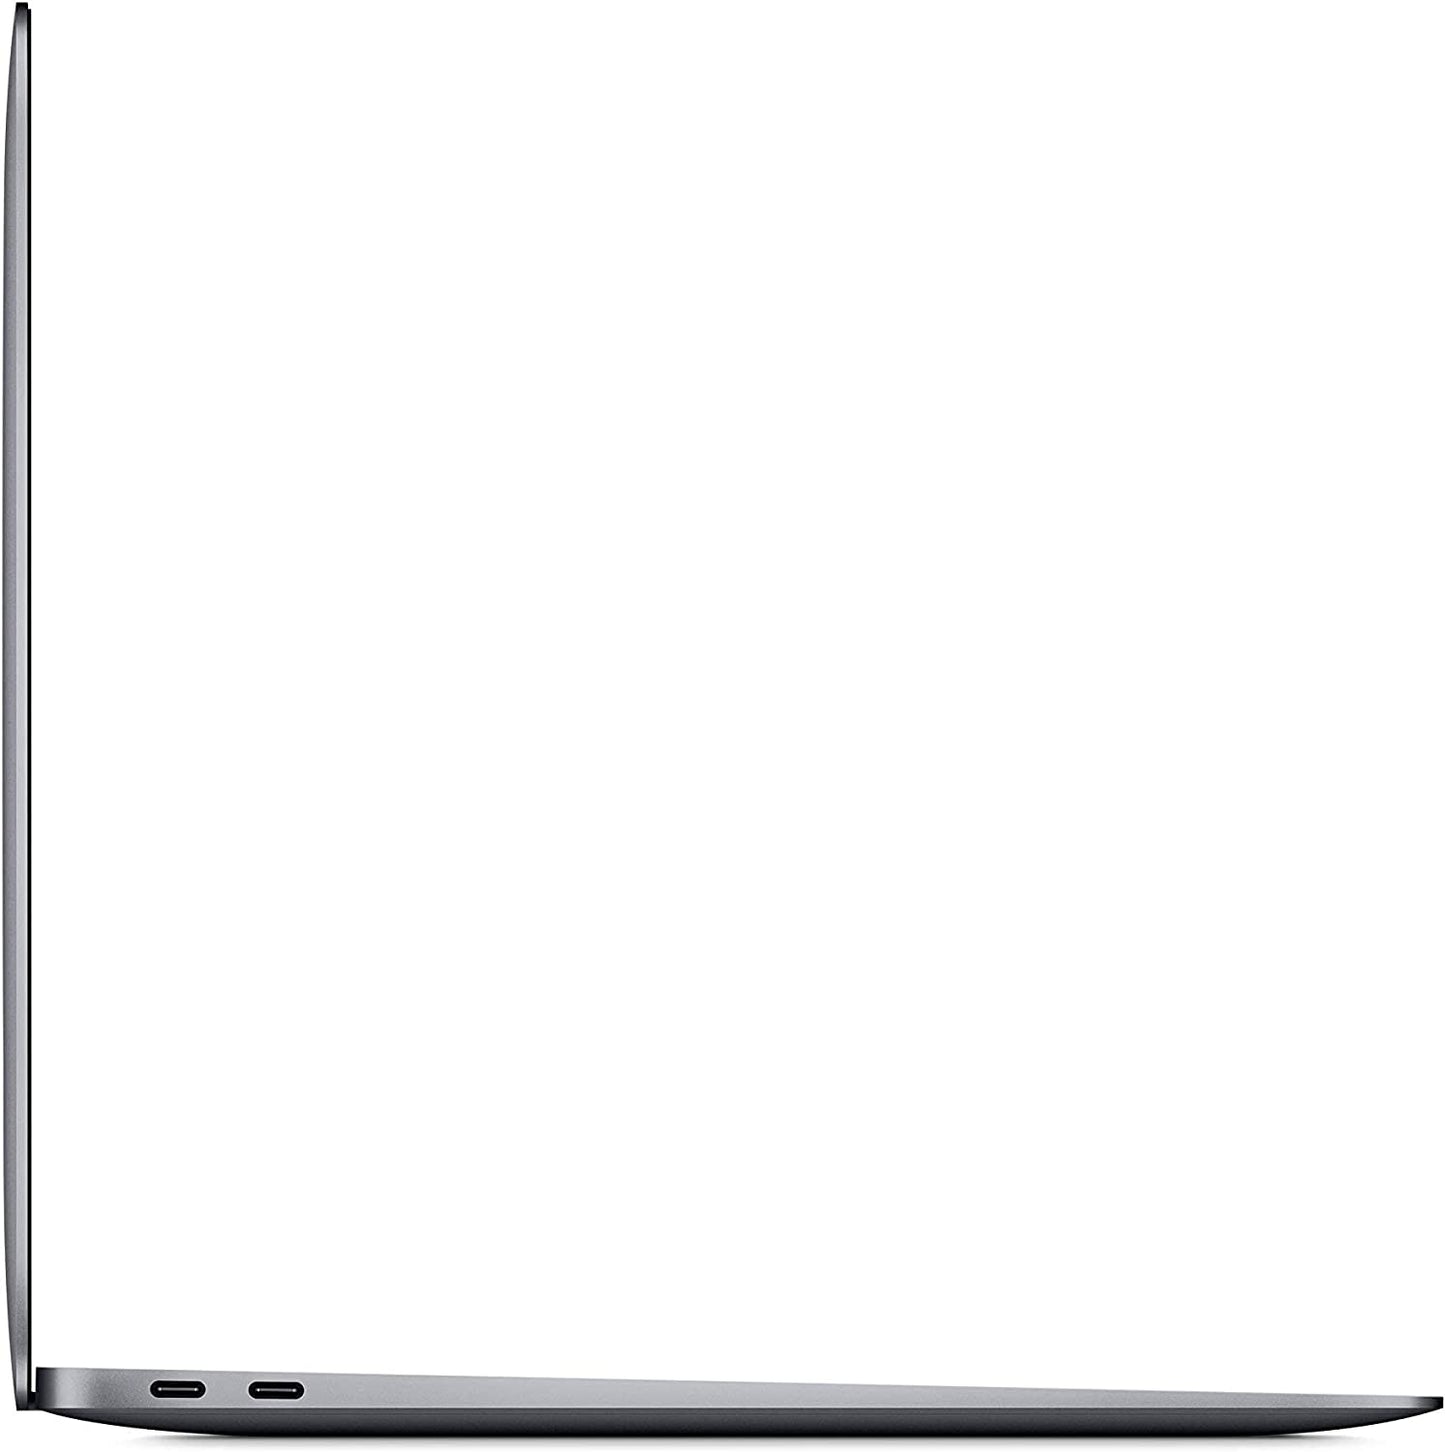 Exclusive for Member Prime >> Early 2020 Apple MacBook Air with 1.1 GHz Intel Core i5 13 inch